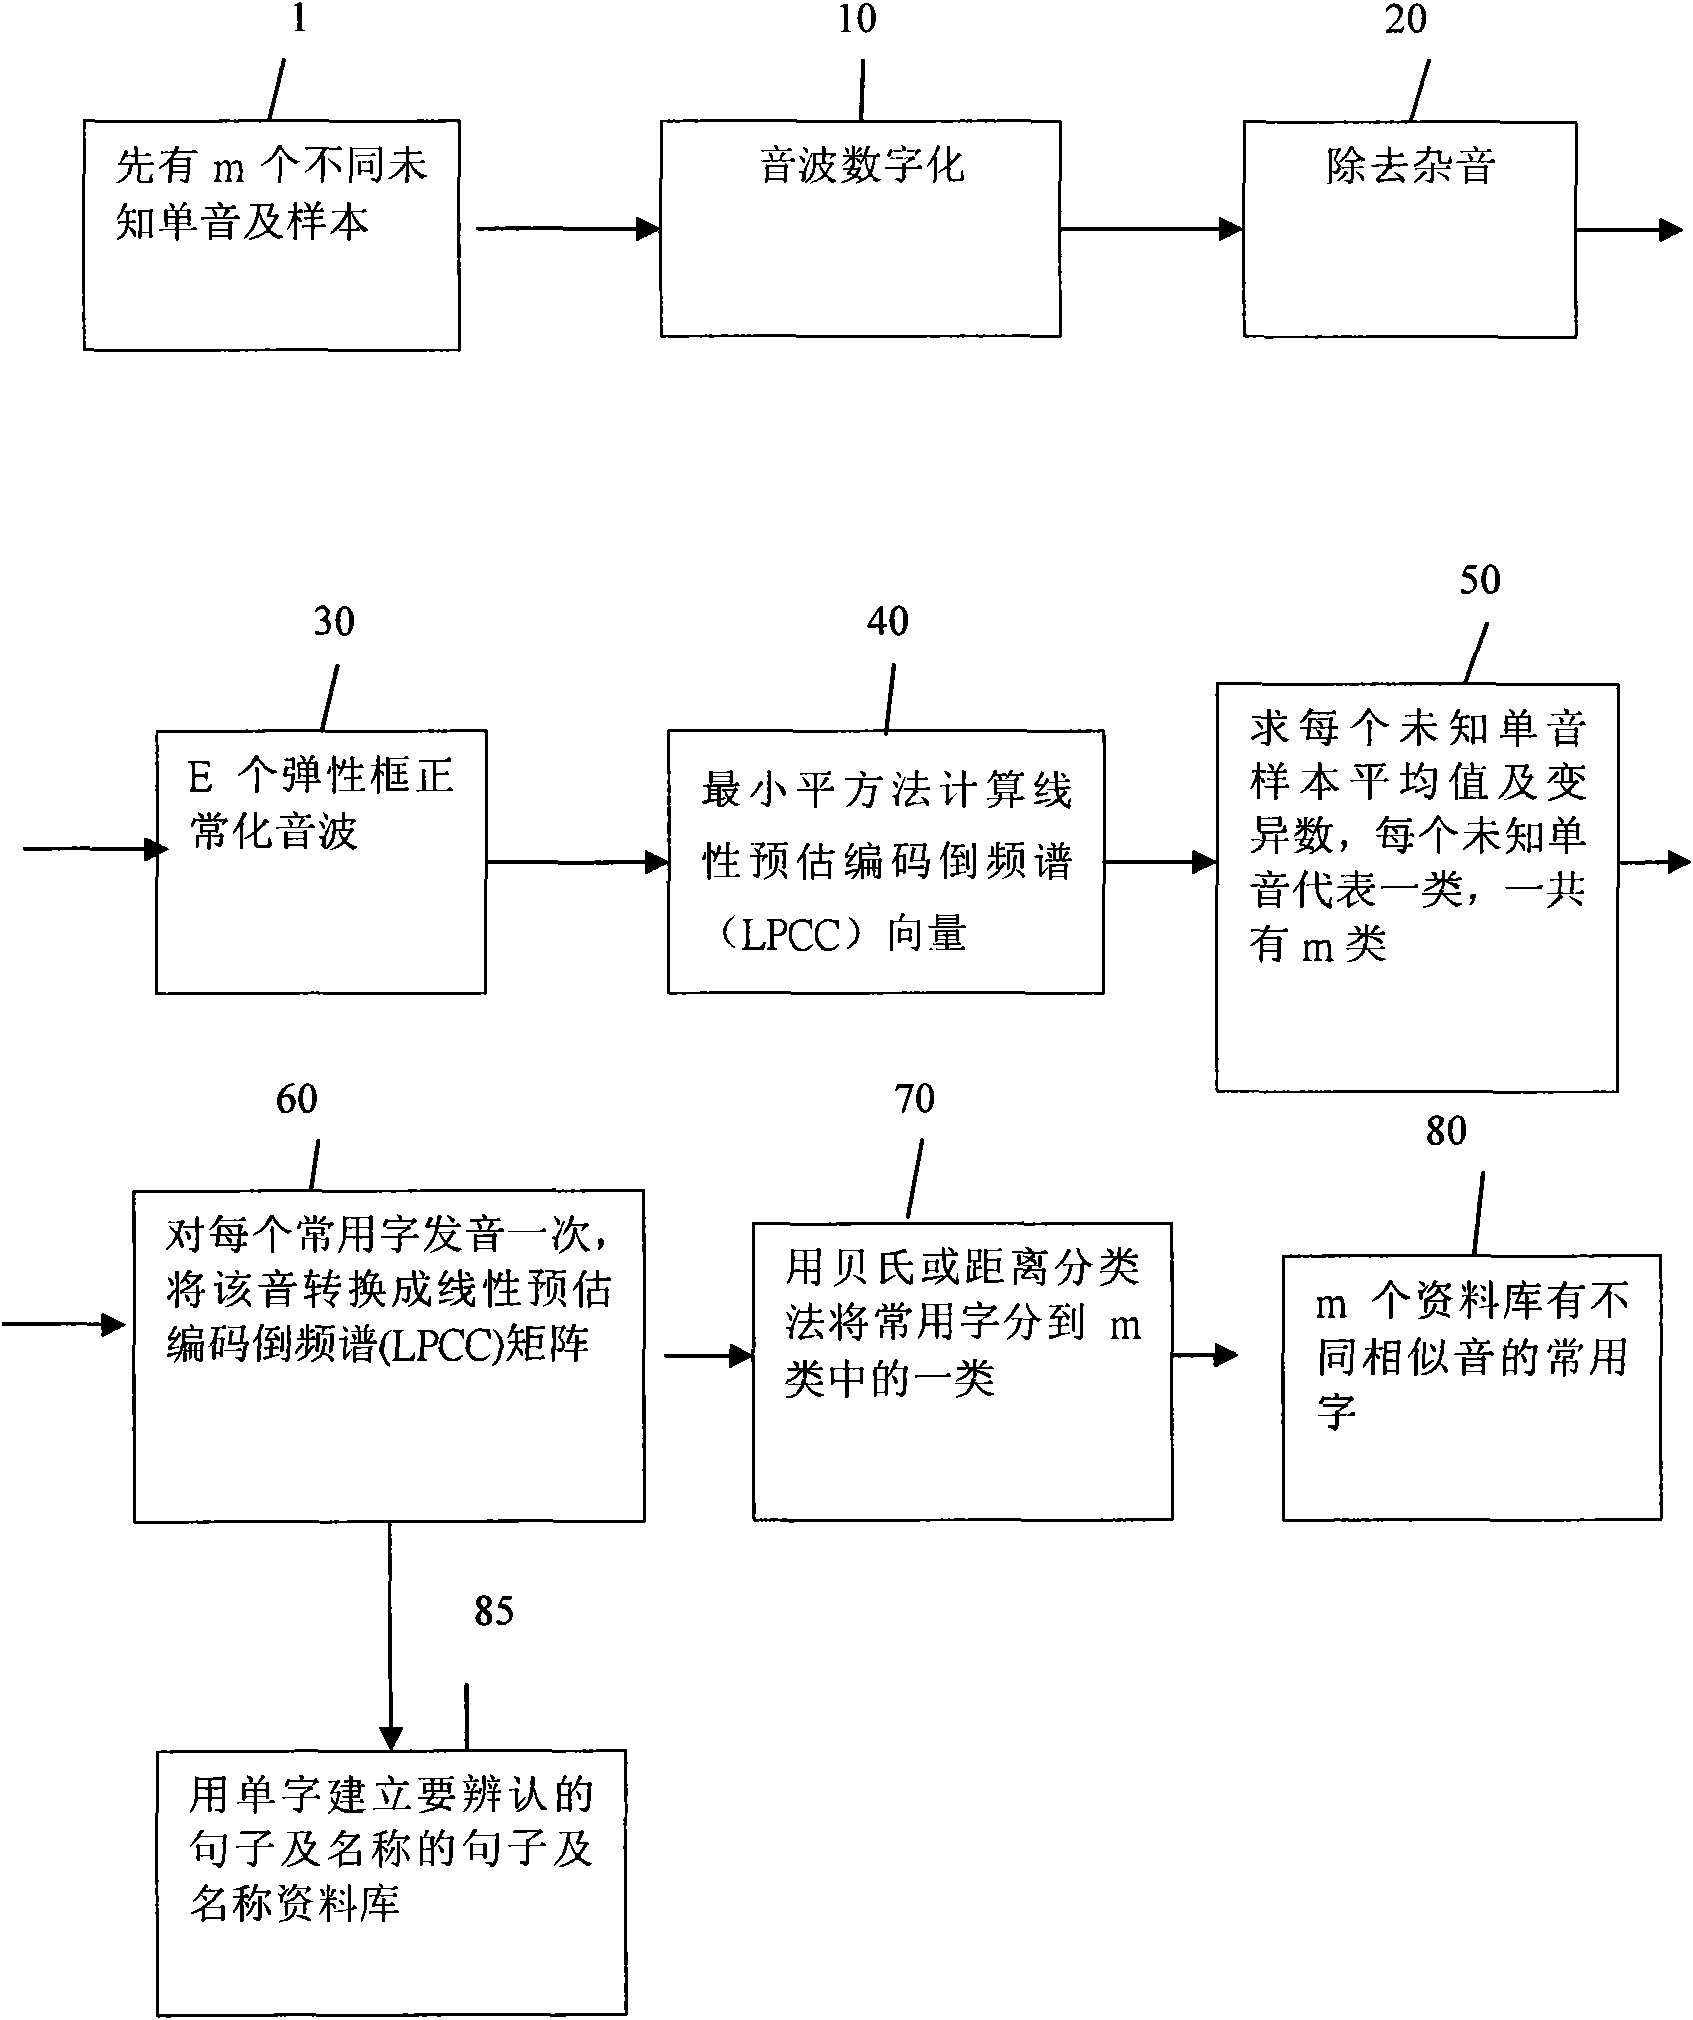 Method for identifying all languages by voice and inputting individual characters by voice